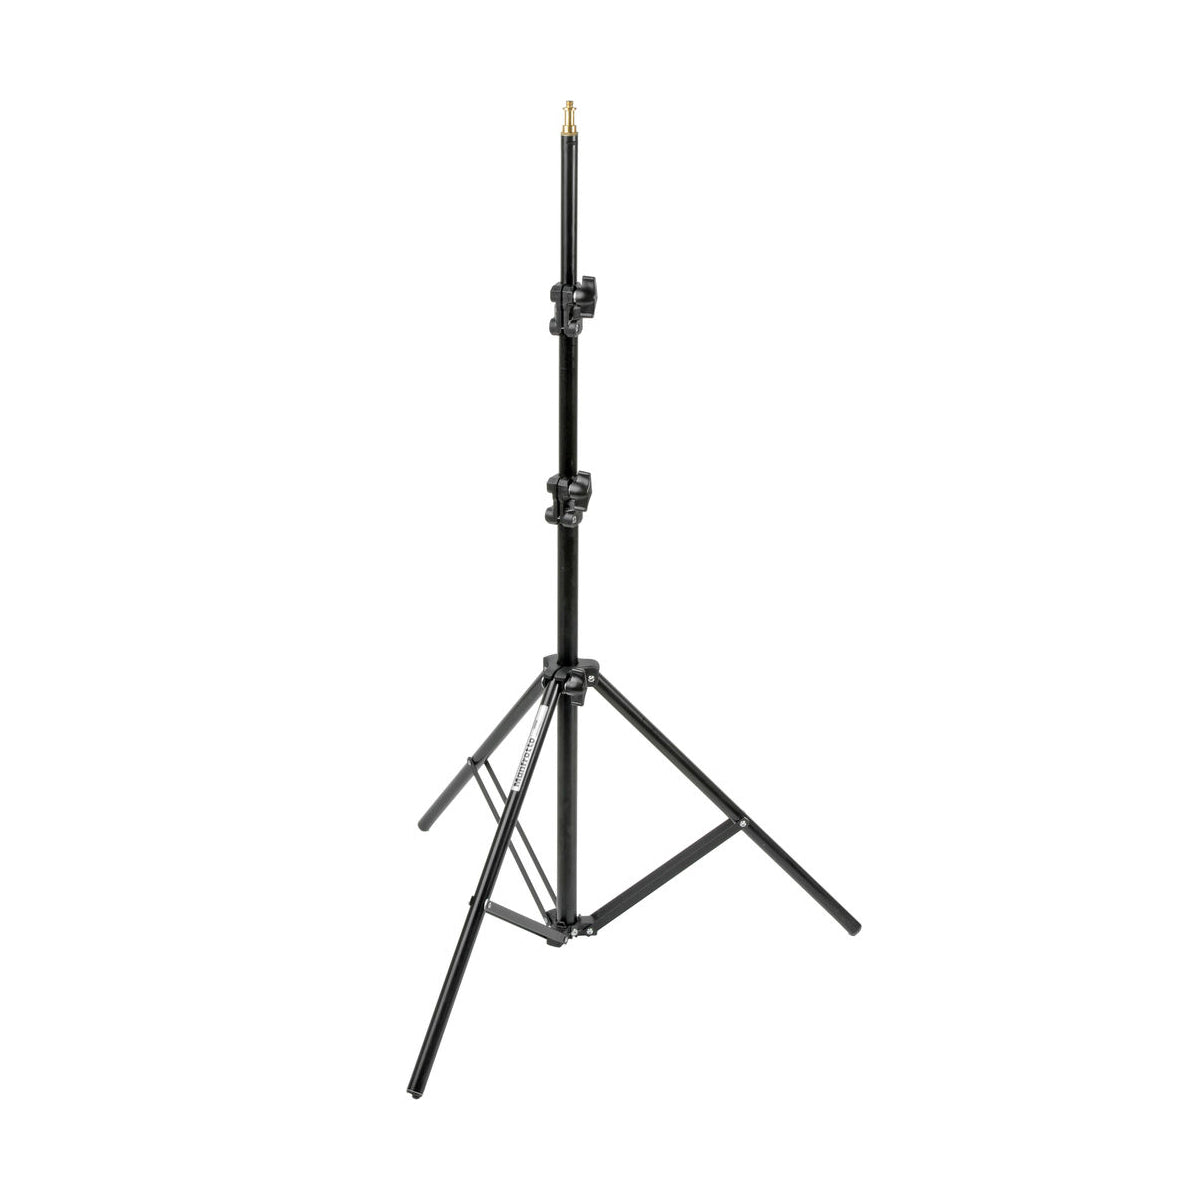 Manfrotto 366B Basic Light Stand 6ft